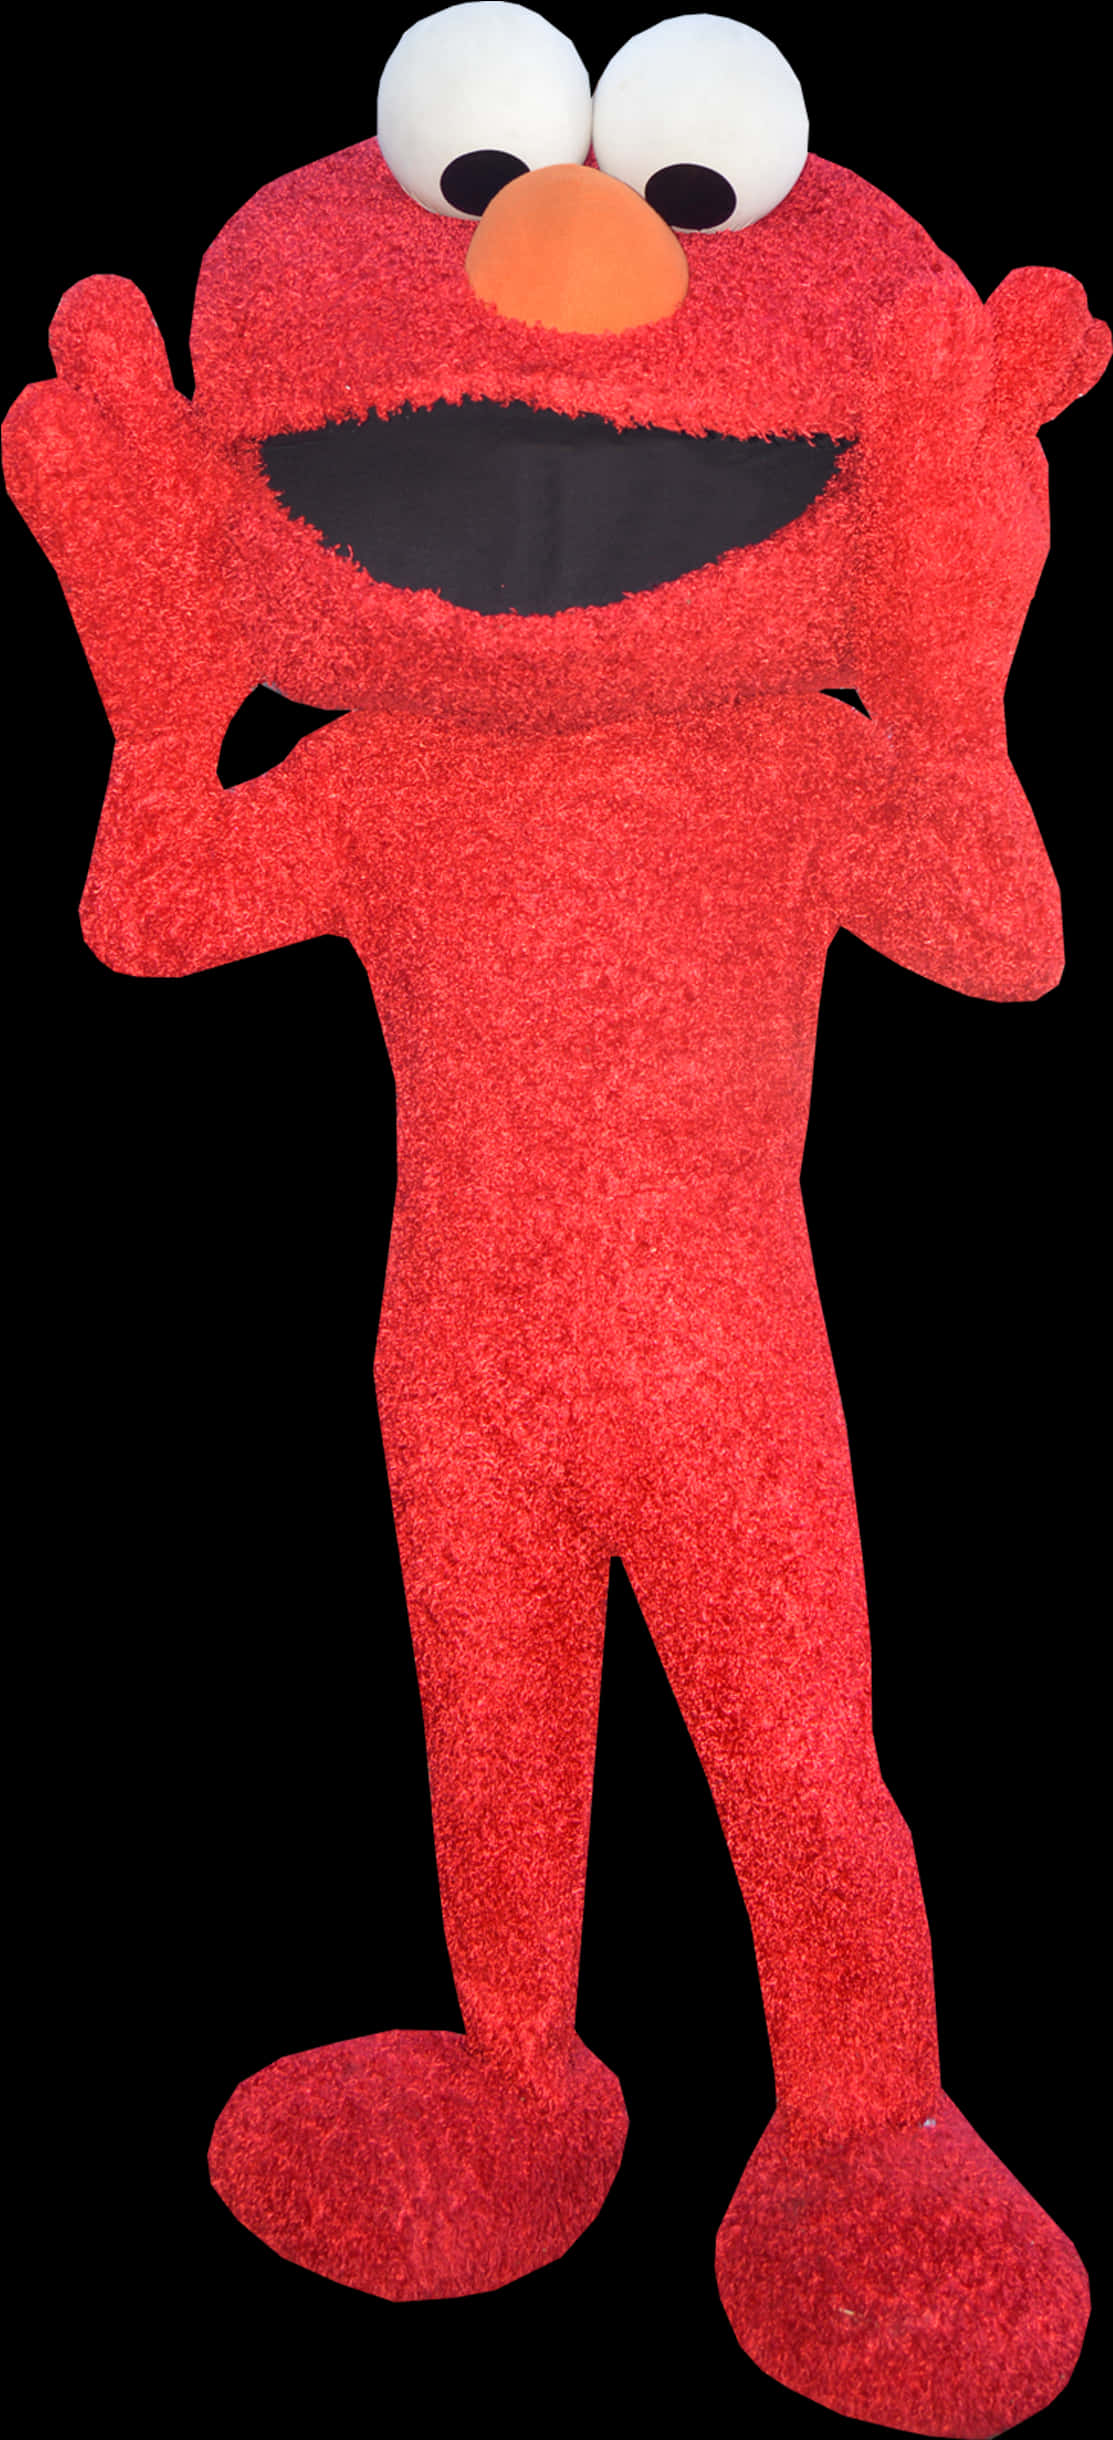 A Person In A Red Garment